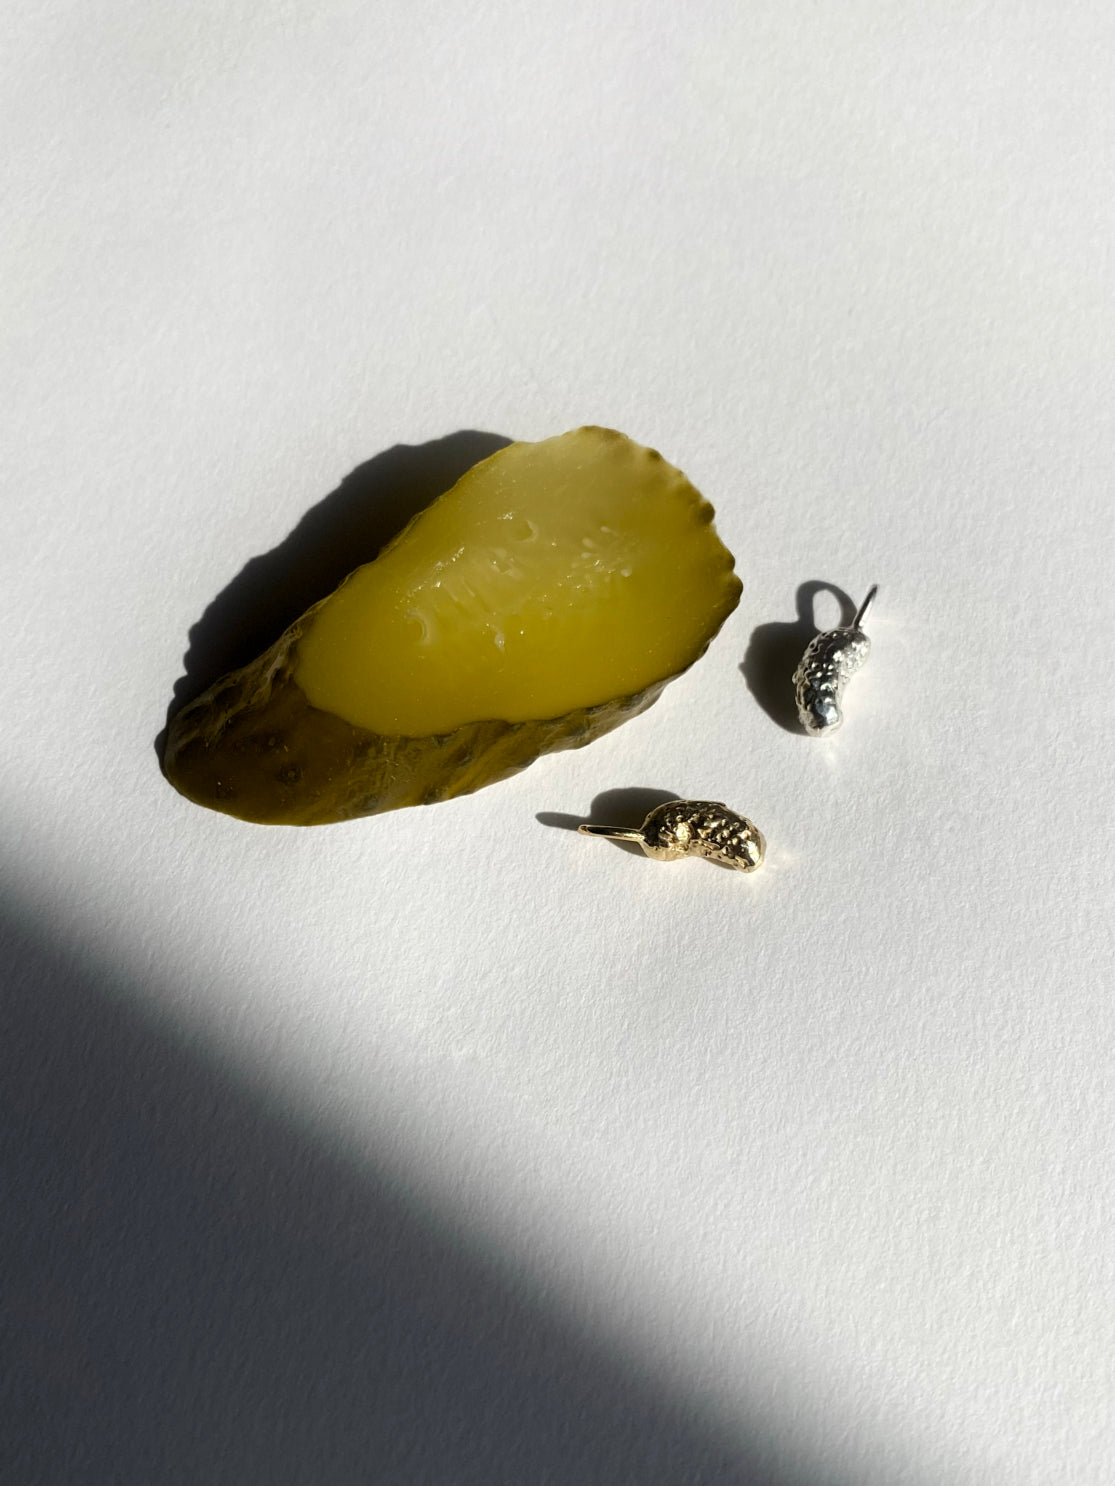 Silver and gold pickle charms beside pickle slice on white background